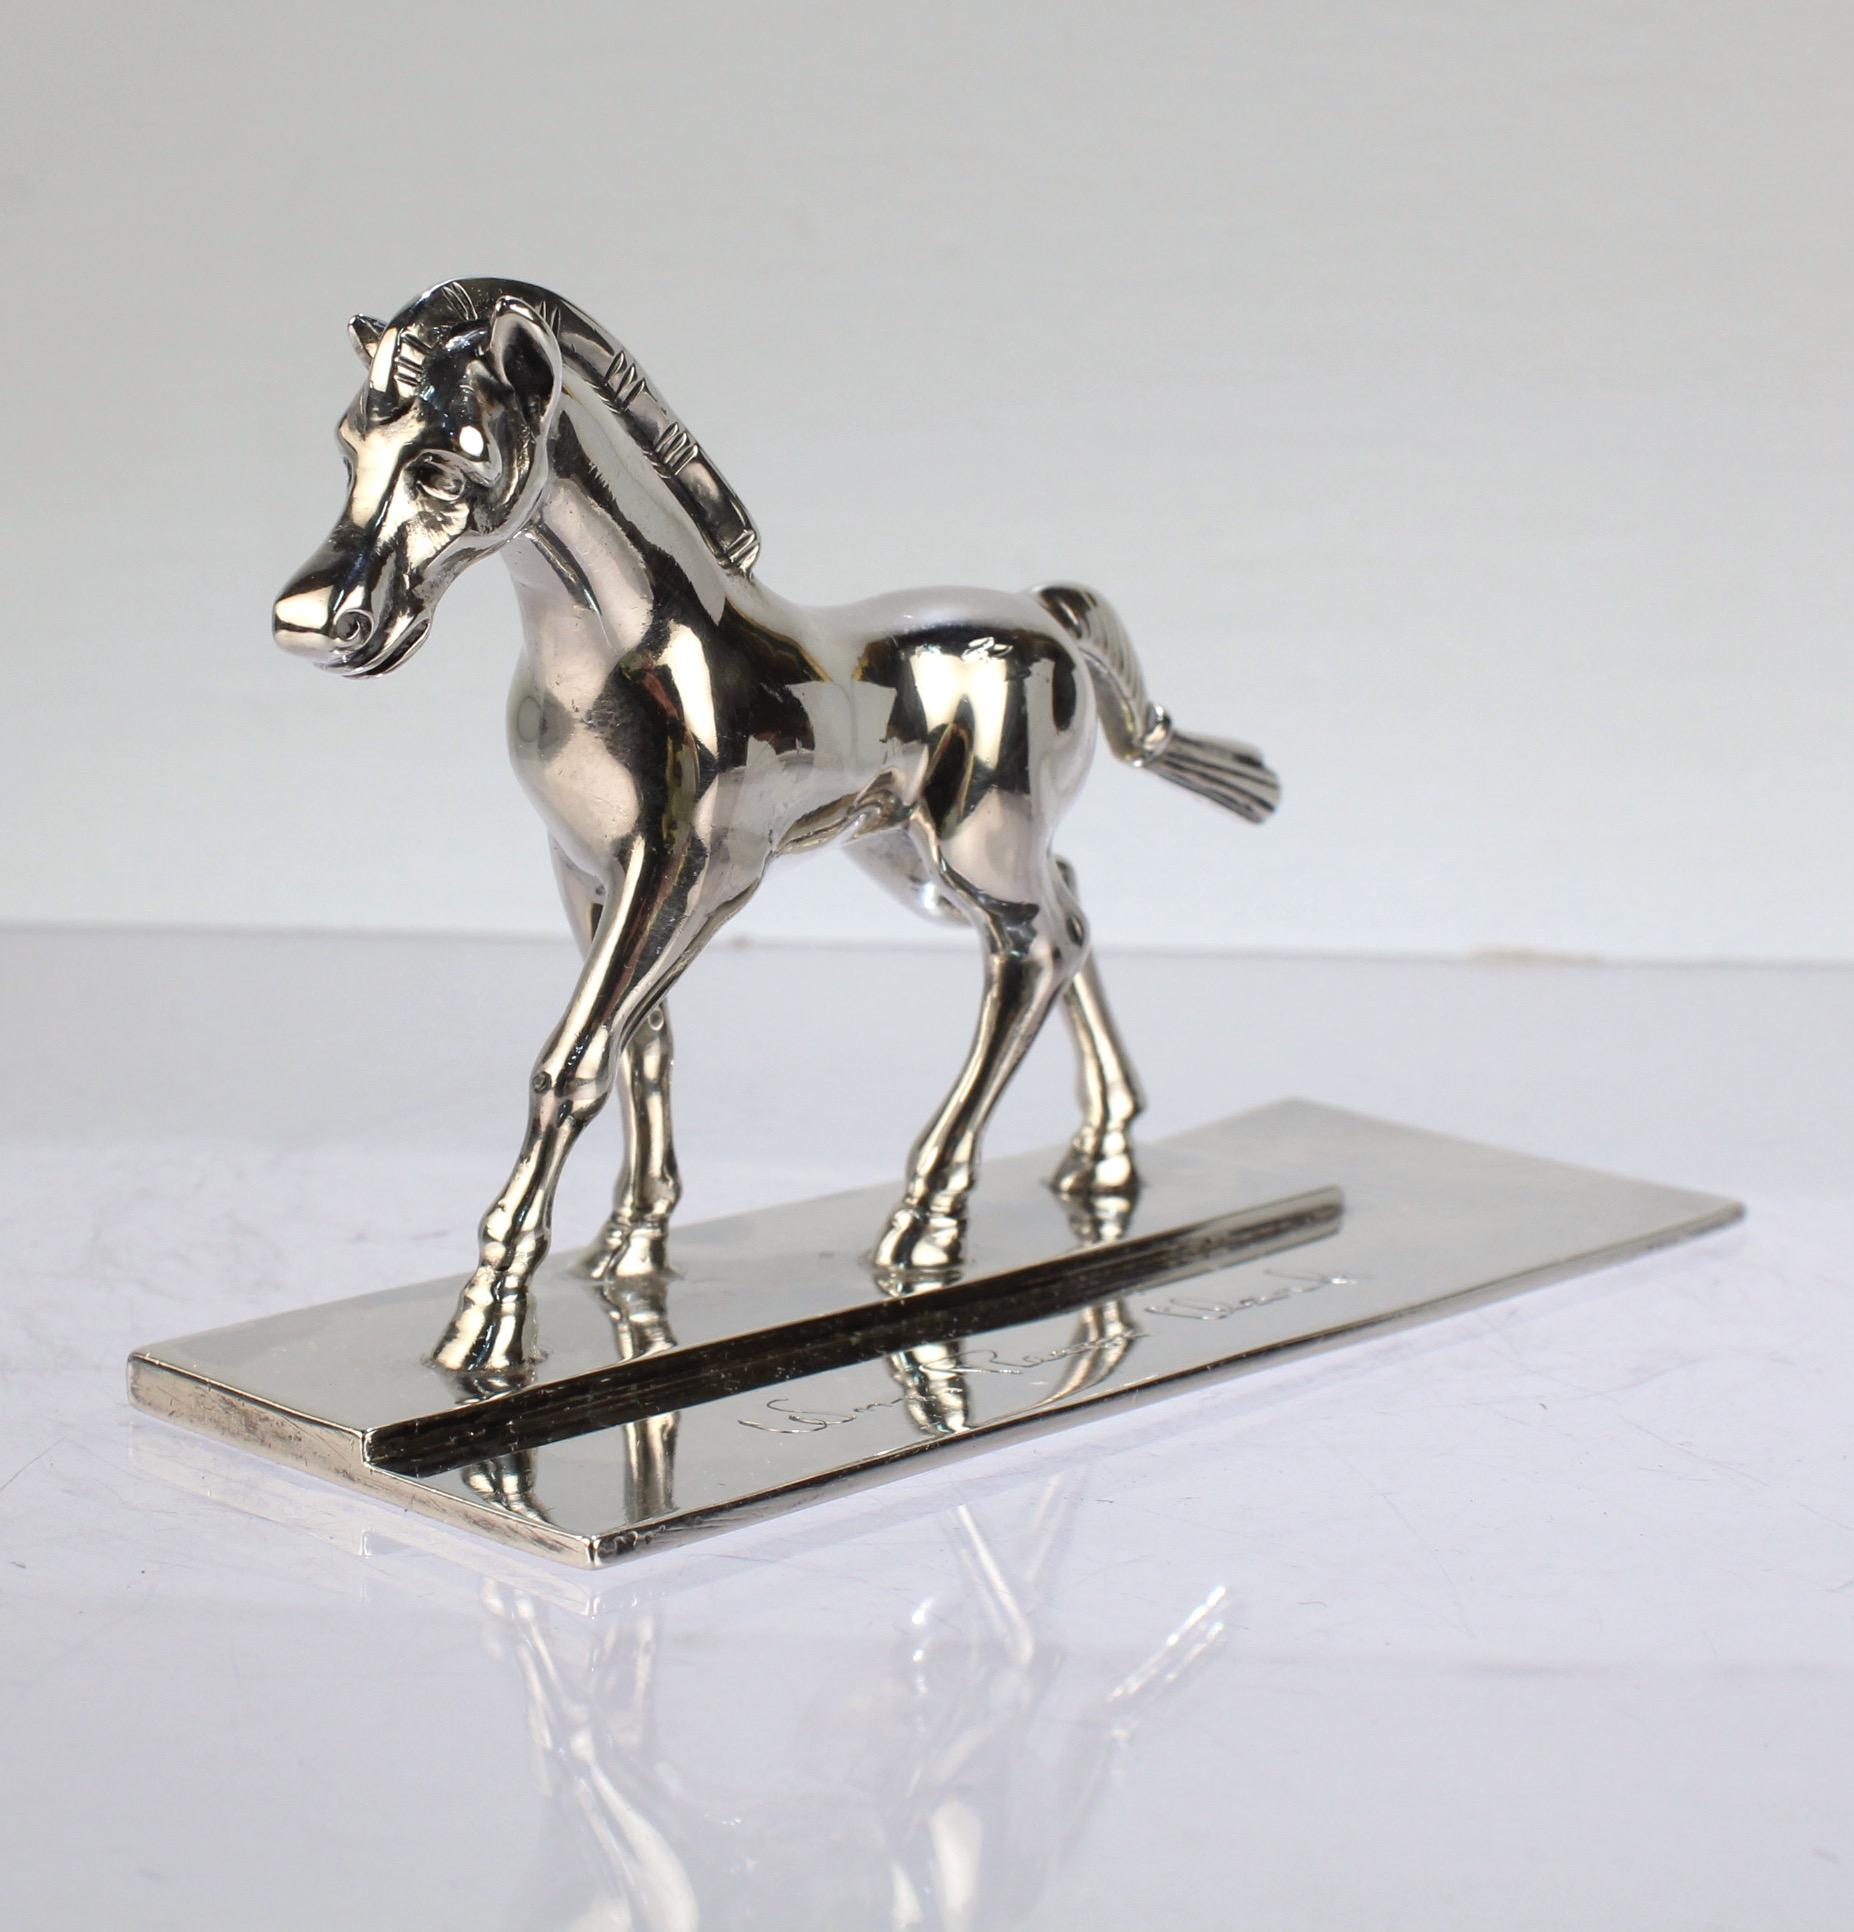 A very fine and rare Erik Magnussen sterling silver paperweight. 

Depicting a horse in stride mounted on a stepped silver base.

The base bears an engraved name or dedication.

Simply a wonderful object from one of the 20th Century's finest